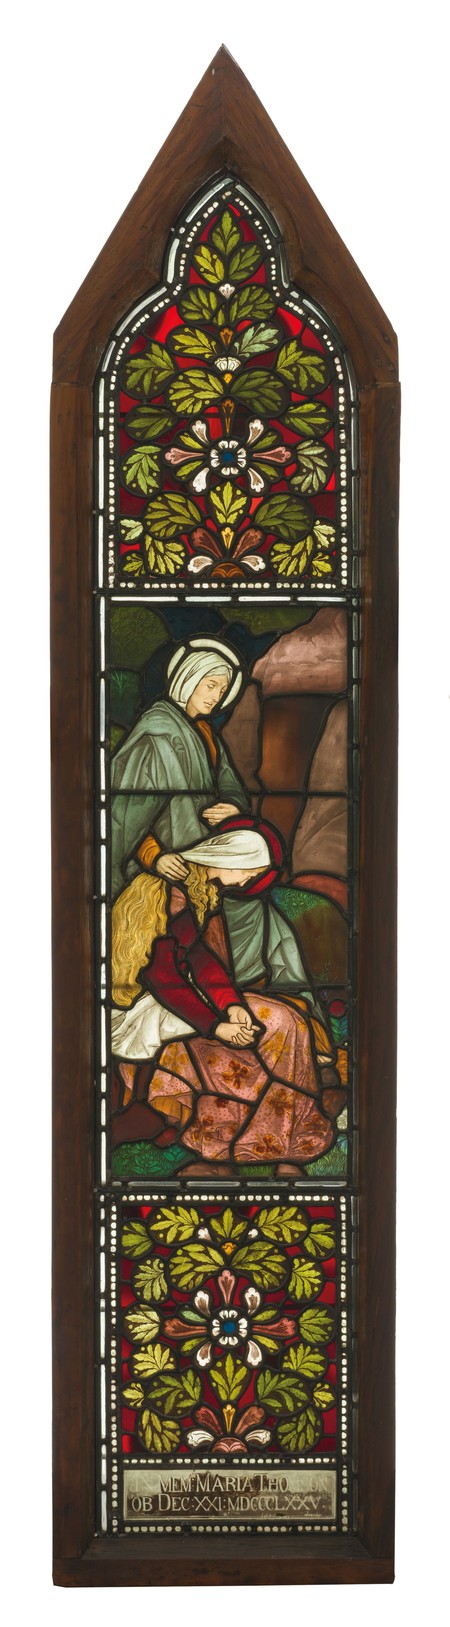 James Powell and Sons St Mary Magdalene and Mary Mother of James at the Empty Tomb c. 1877. Stained glass. Collection of Christchurch Art Gallery Te Puna o Waiwhetū, purchased 1987